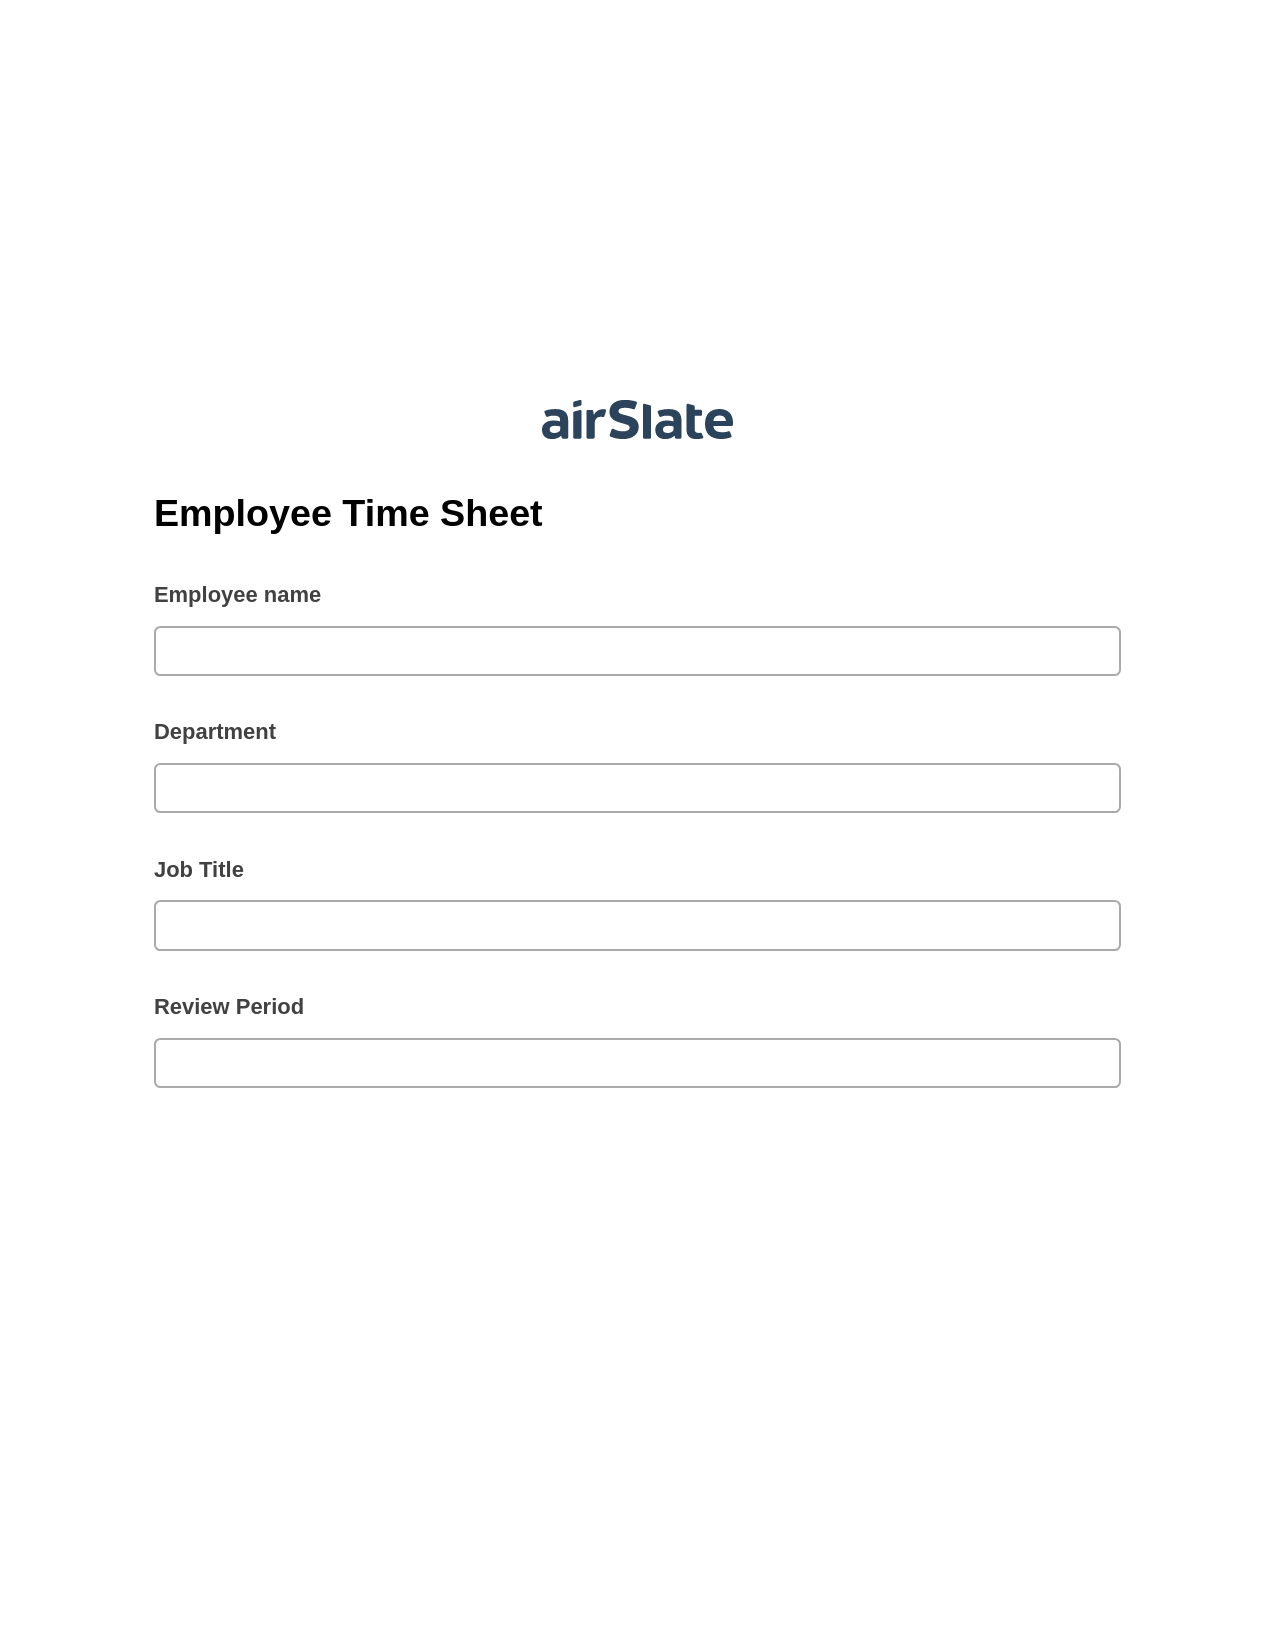 Employee Time Sheet Pre-fill Dropdowns from Excel Bot, Create slate addon, Archive to Dropbox Bot